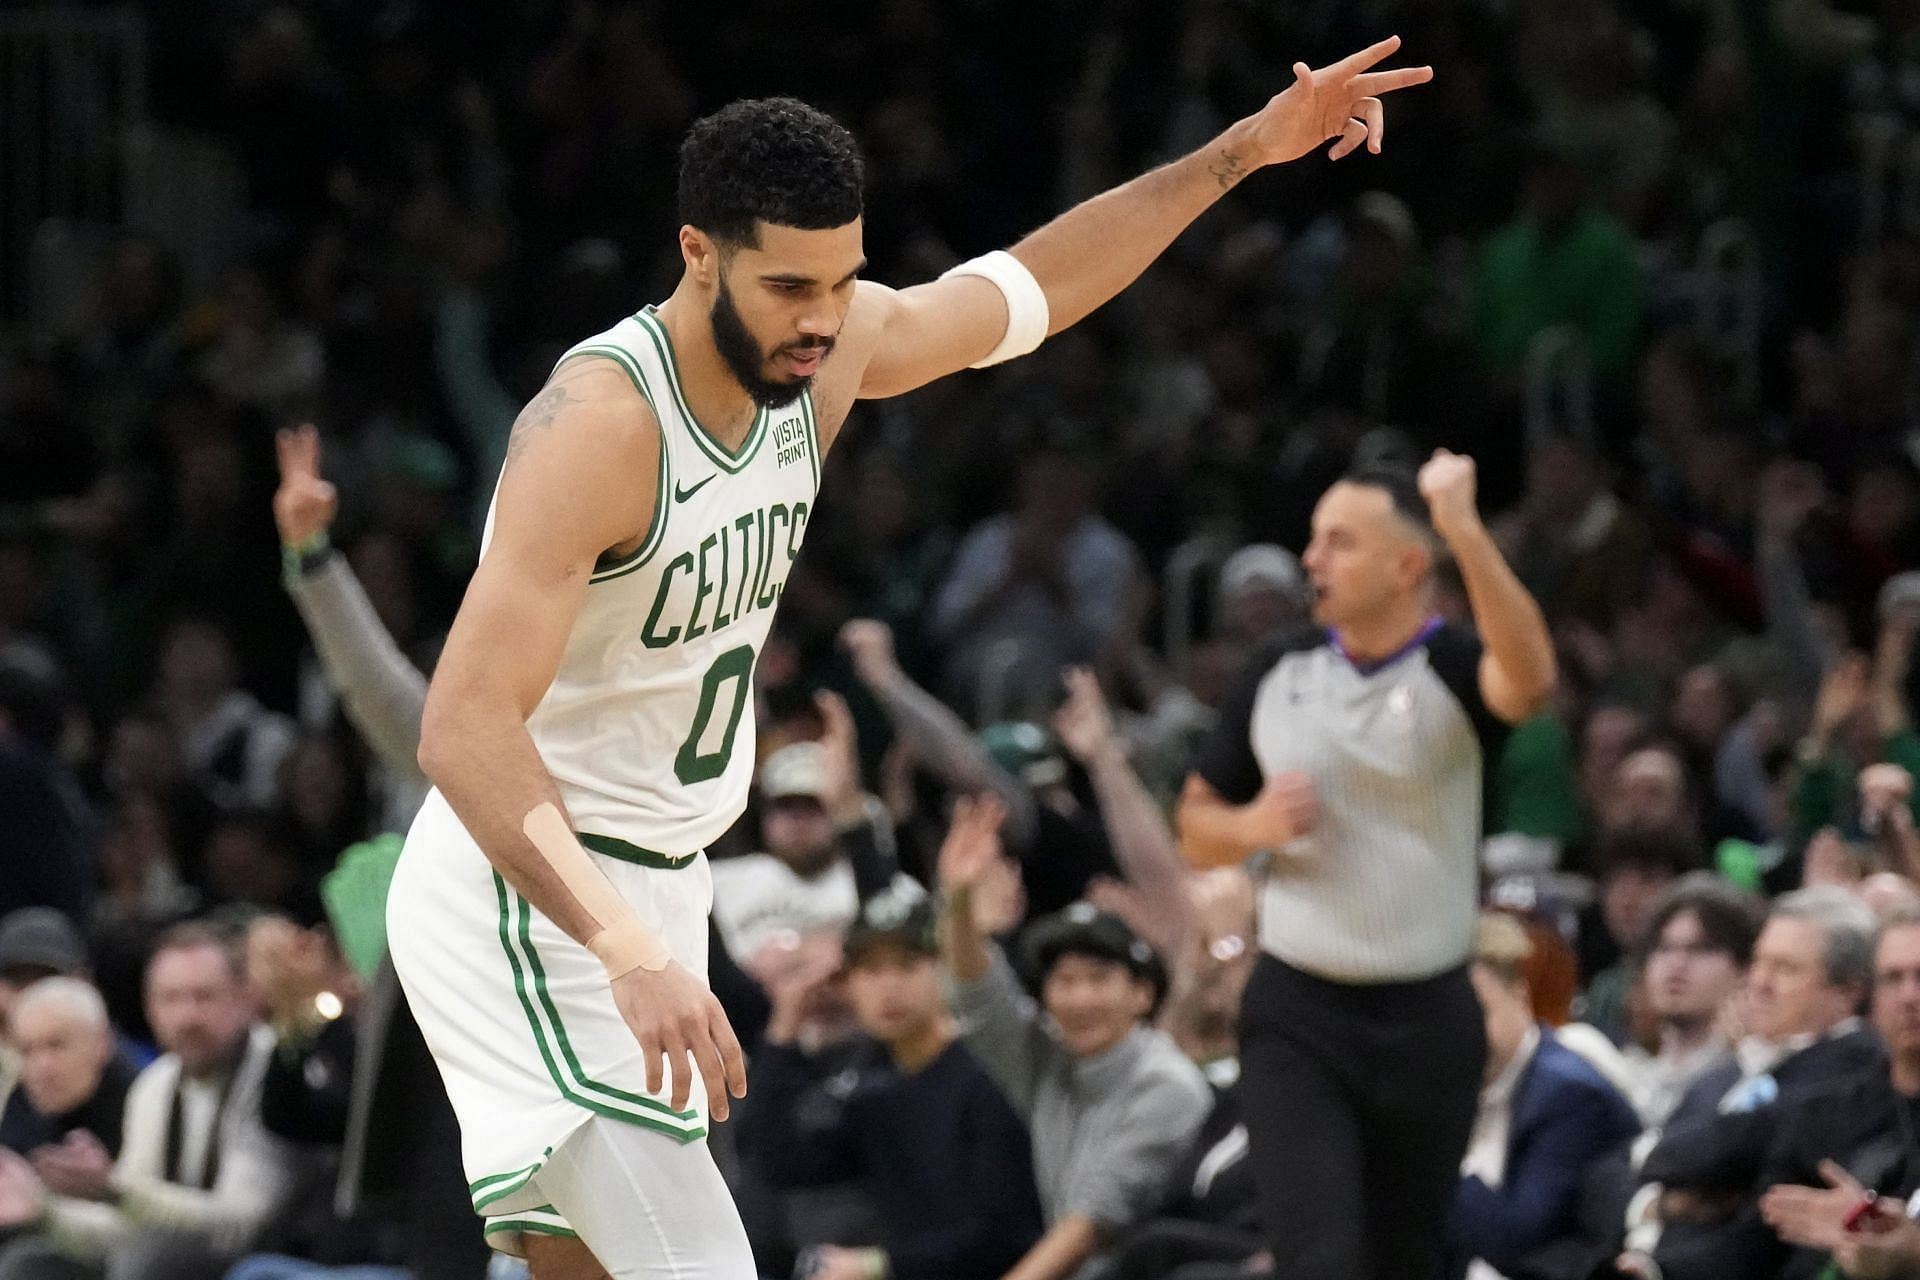 How to watch Golden State Warriors vs Boston Celtics NBA game: Live stream,  TV channel, kickoff, stats & everything you need to know